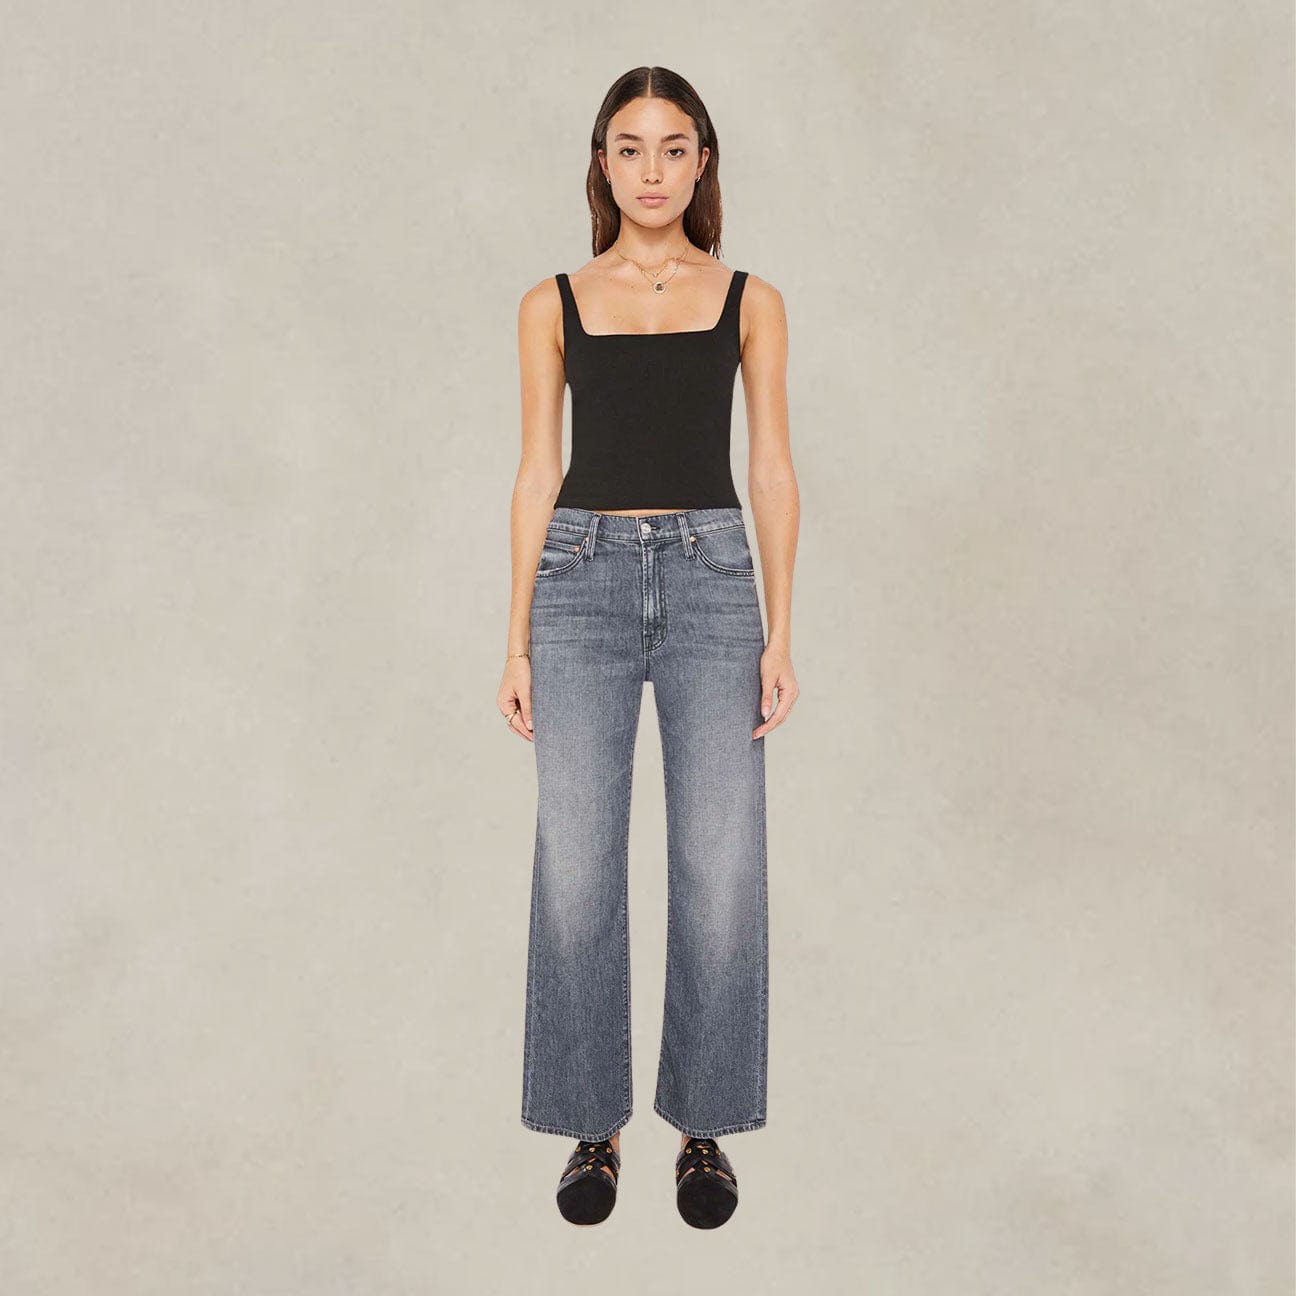 MOTHER Jeans The Dodger Ankle Superio Denim